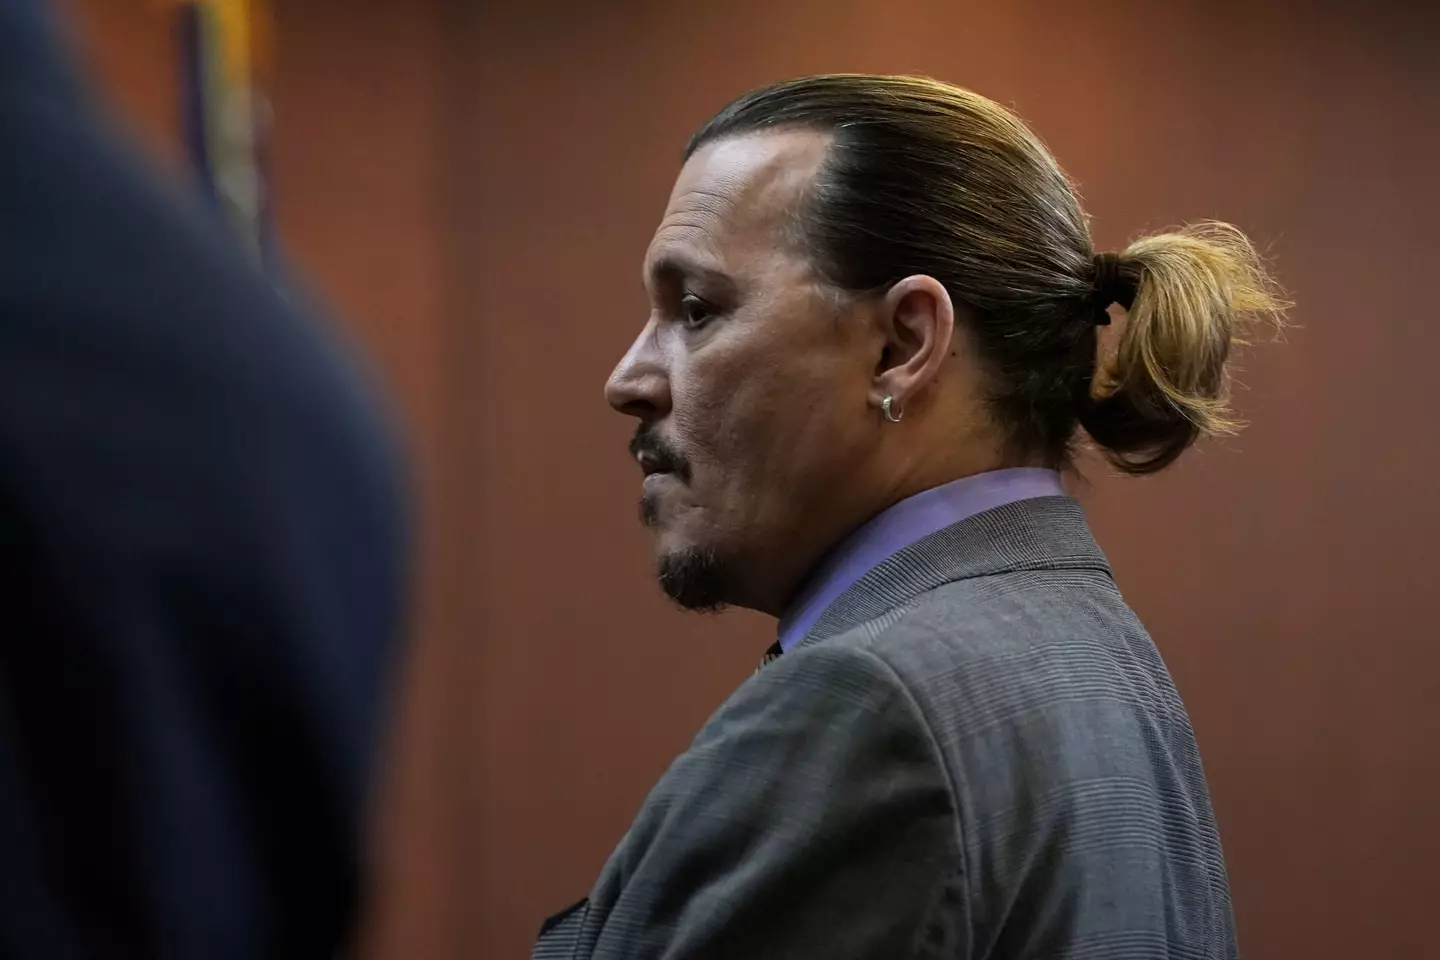 Depp, 58, is suing Heard, 36, for libel over a 2018 article in The Washington Post (